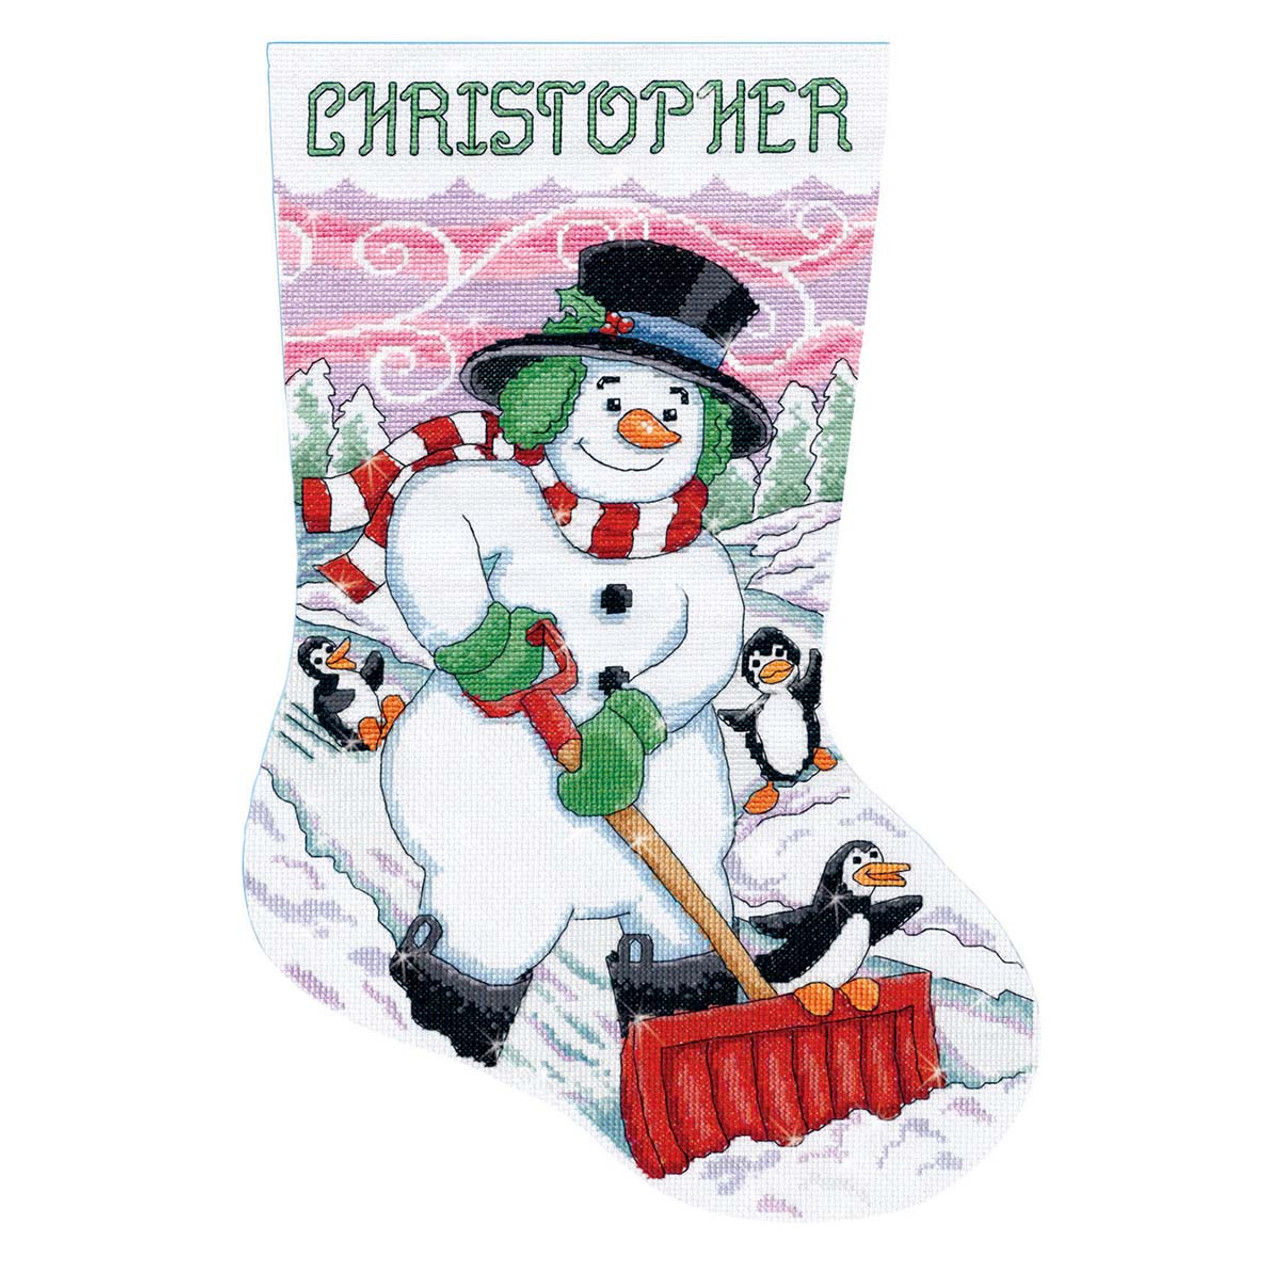 Counted Cross Stitch, Christmas Stocking Kit, Welcome to Winter Snowmen,  Candamar Design, Country Prim Christmas Craft, Free Shipping 